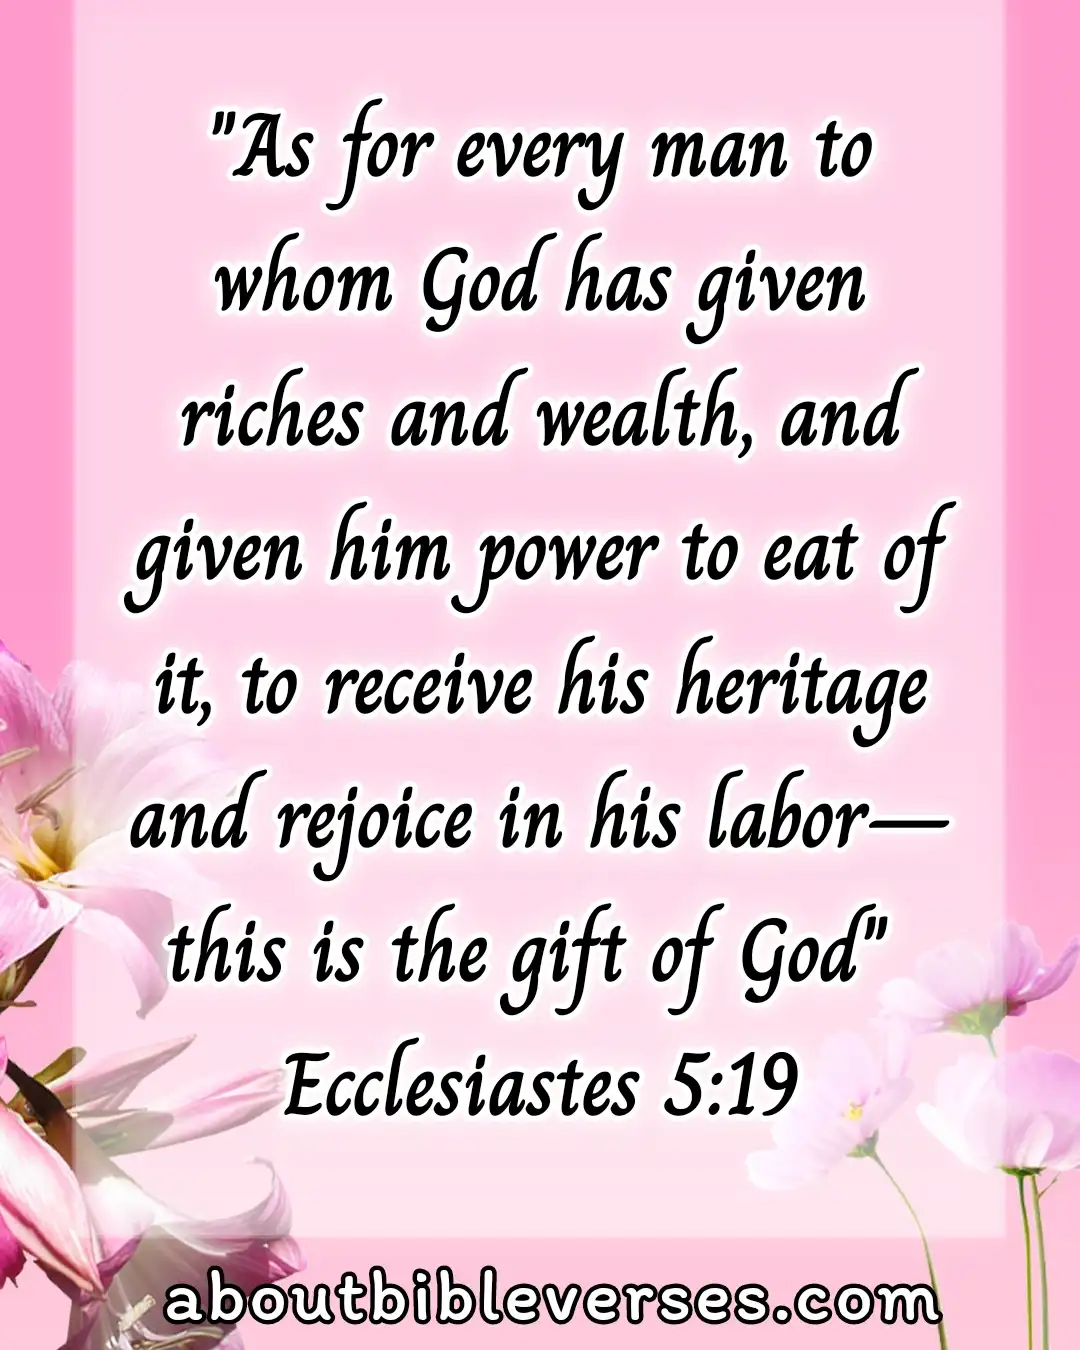 Bible Verses About Wealth And Prosperity (Ecclesiastes 5:19)